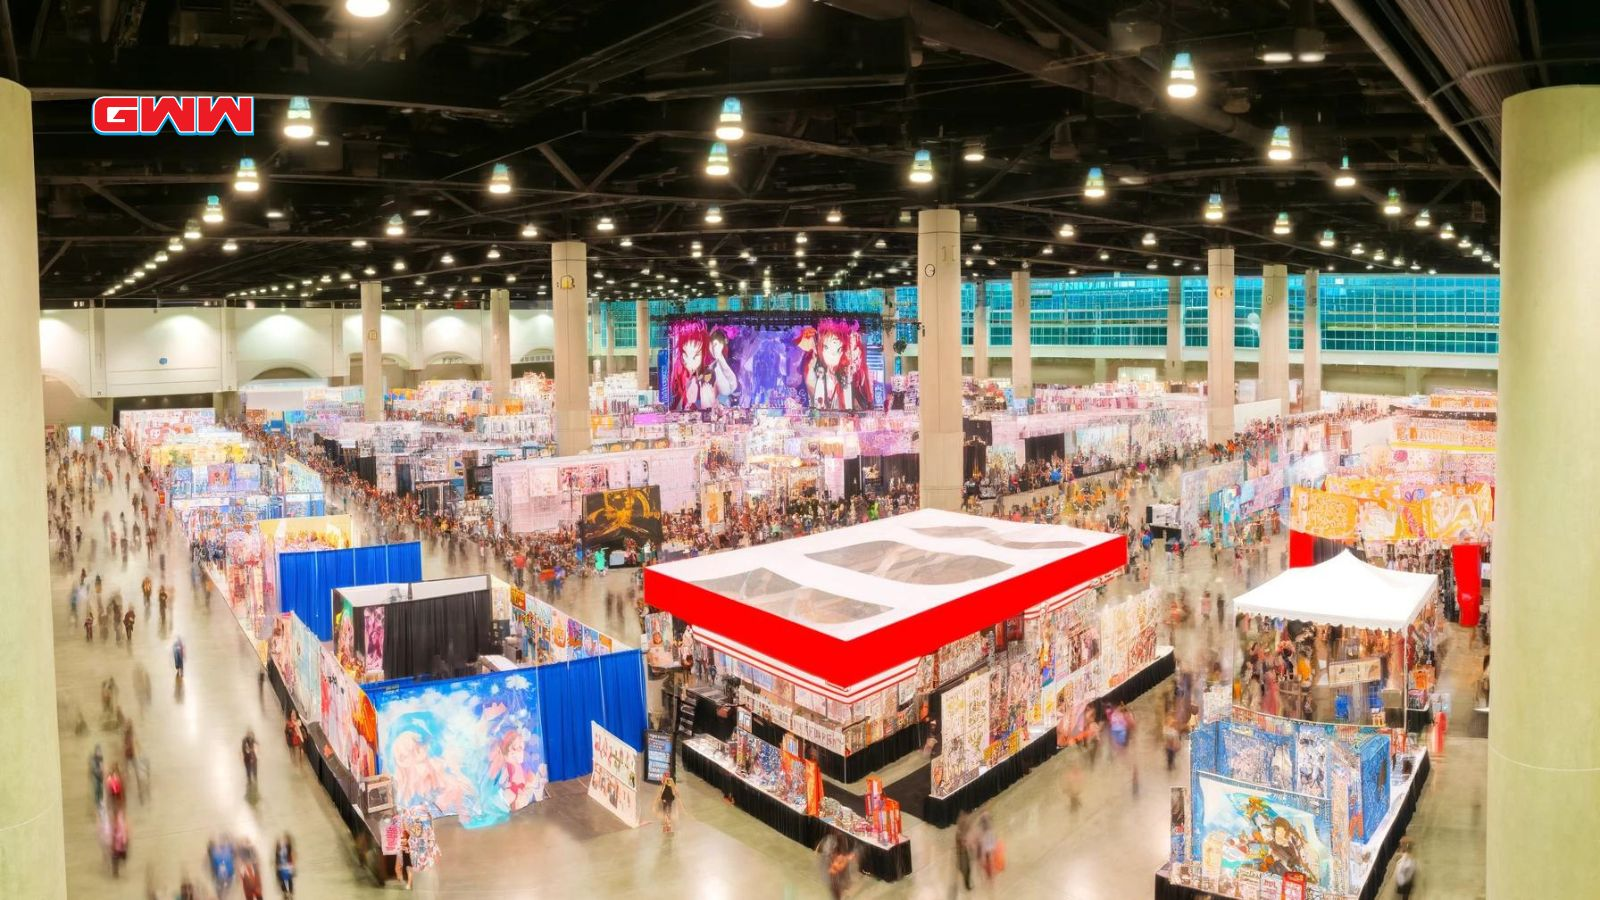 Indoor anime expo with bustling crowd and booths